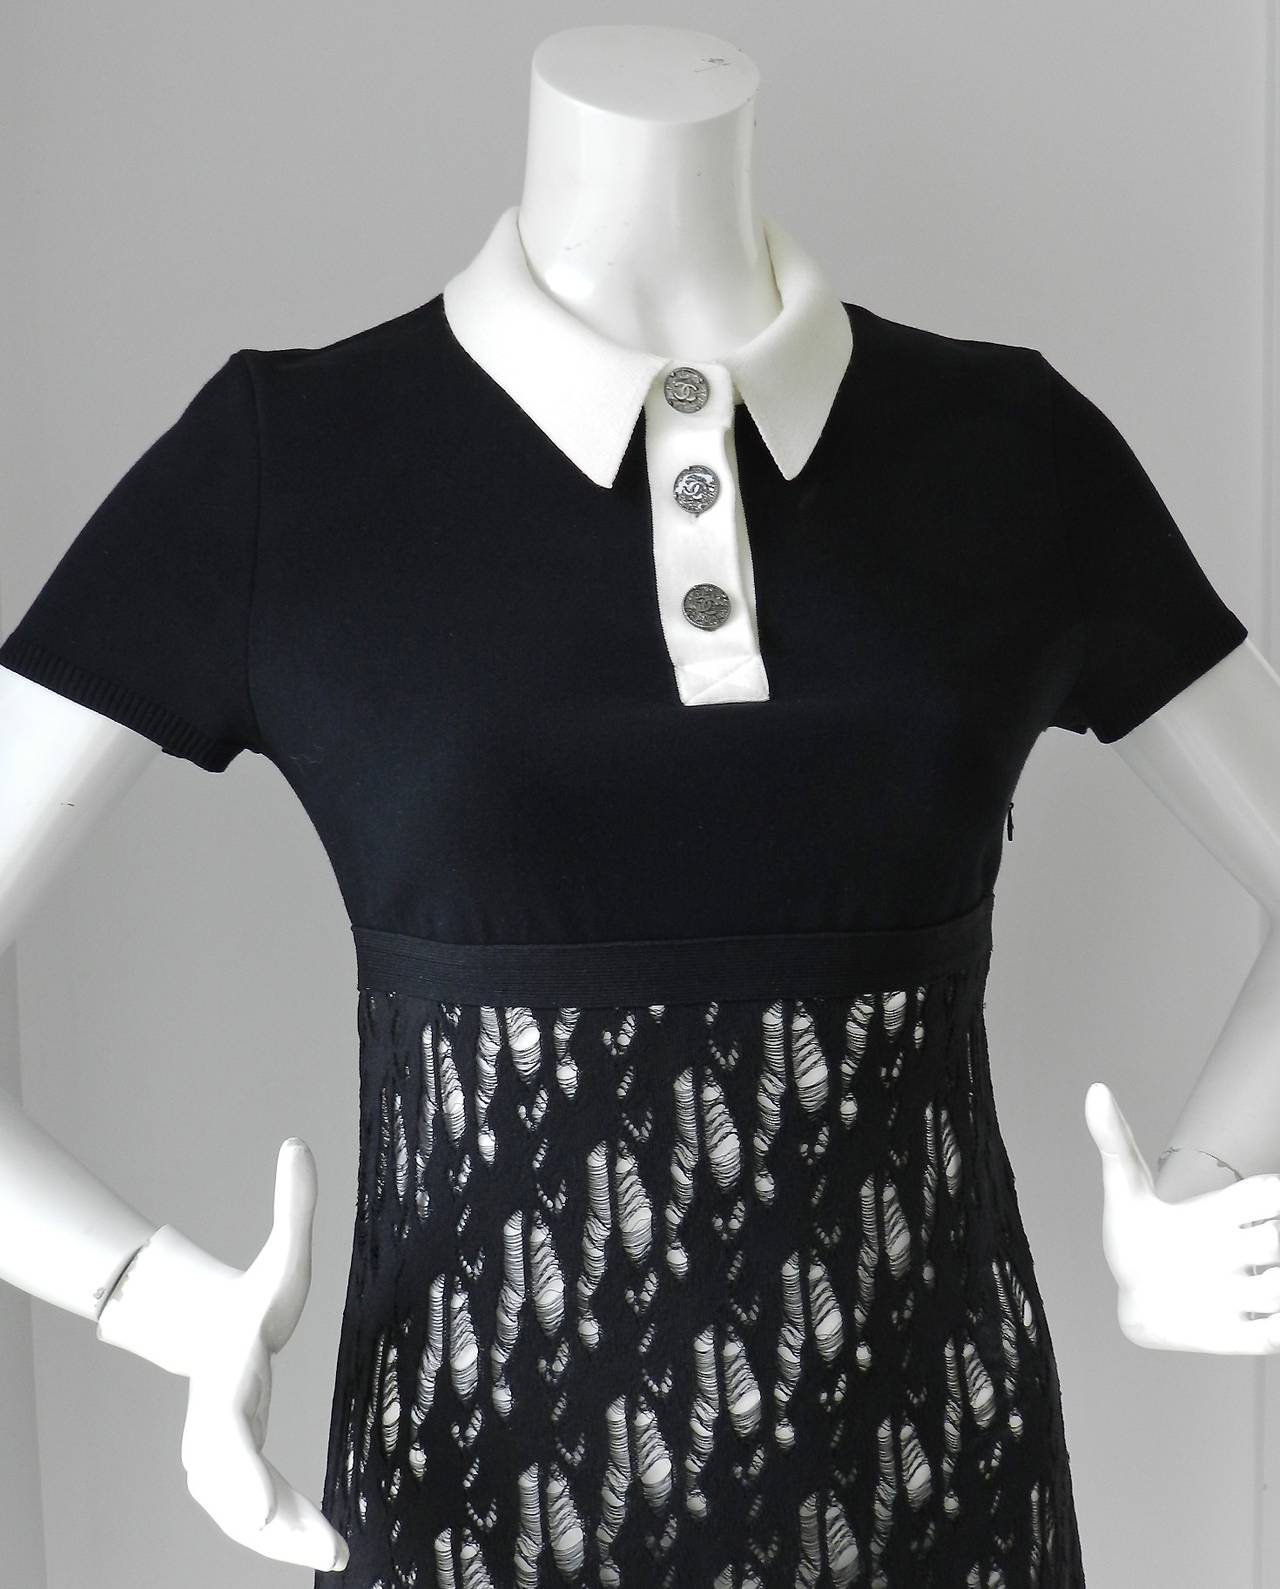 Chanel black and white knit jersey stretch dress with mesh overlay. Stretchy knit jersey fabric composed of 33% cotton, 30 rayon, 22 nylon. Tagged size FR 36 but can also fit a 38 (approx. USA 4/6). Bust to fit 34